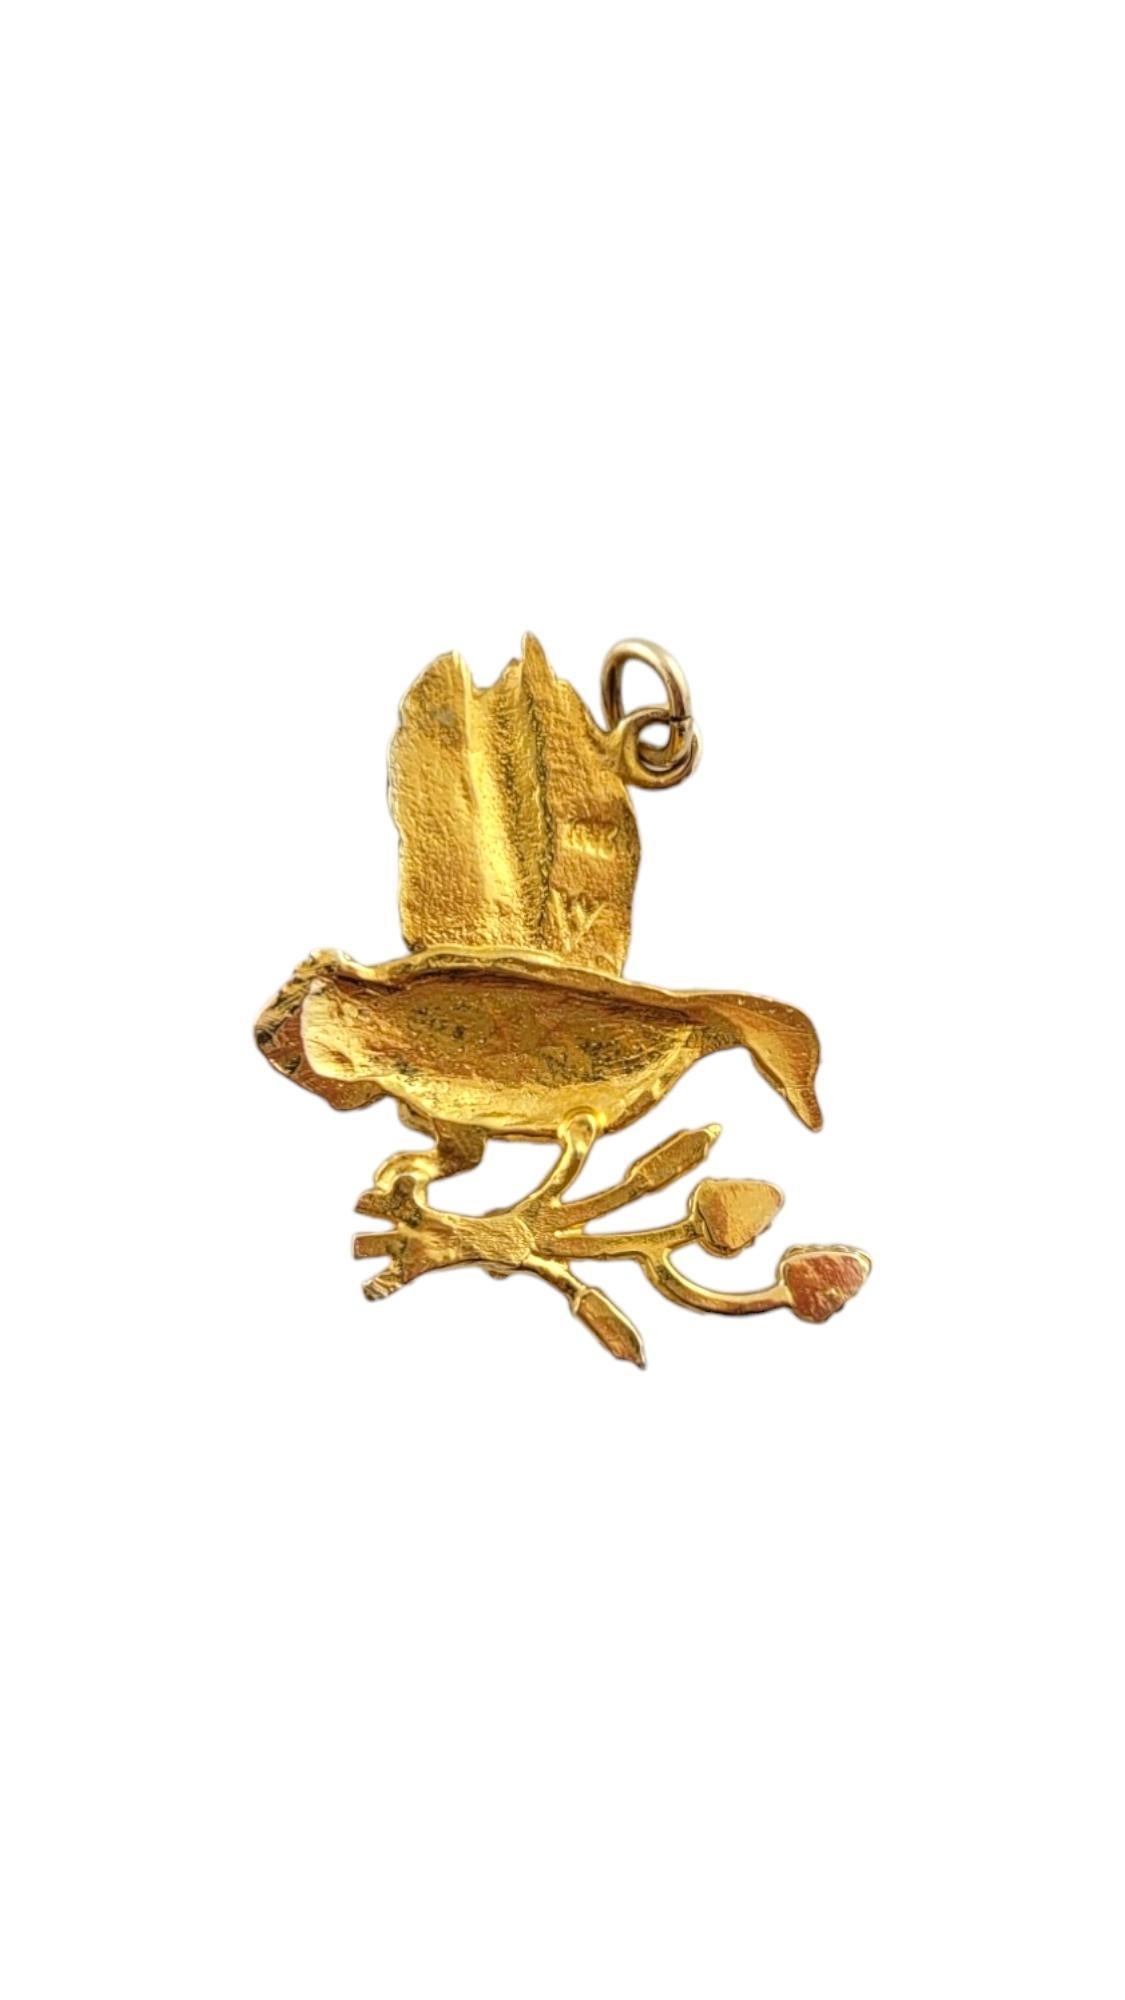 10K Yellow Gold Flying Bird Charm #16230 In Good Condition For Sale In Washington Depot, CT